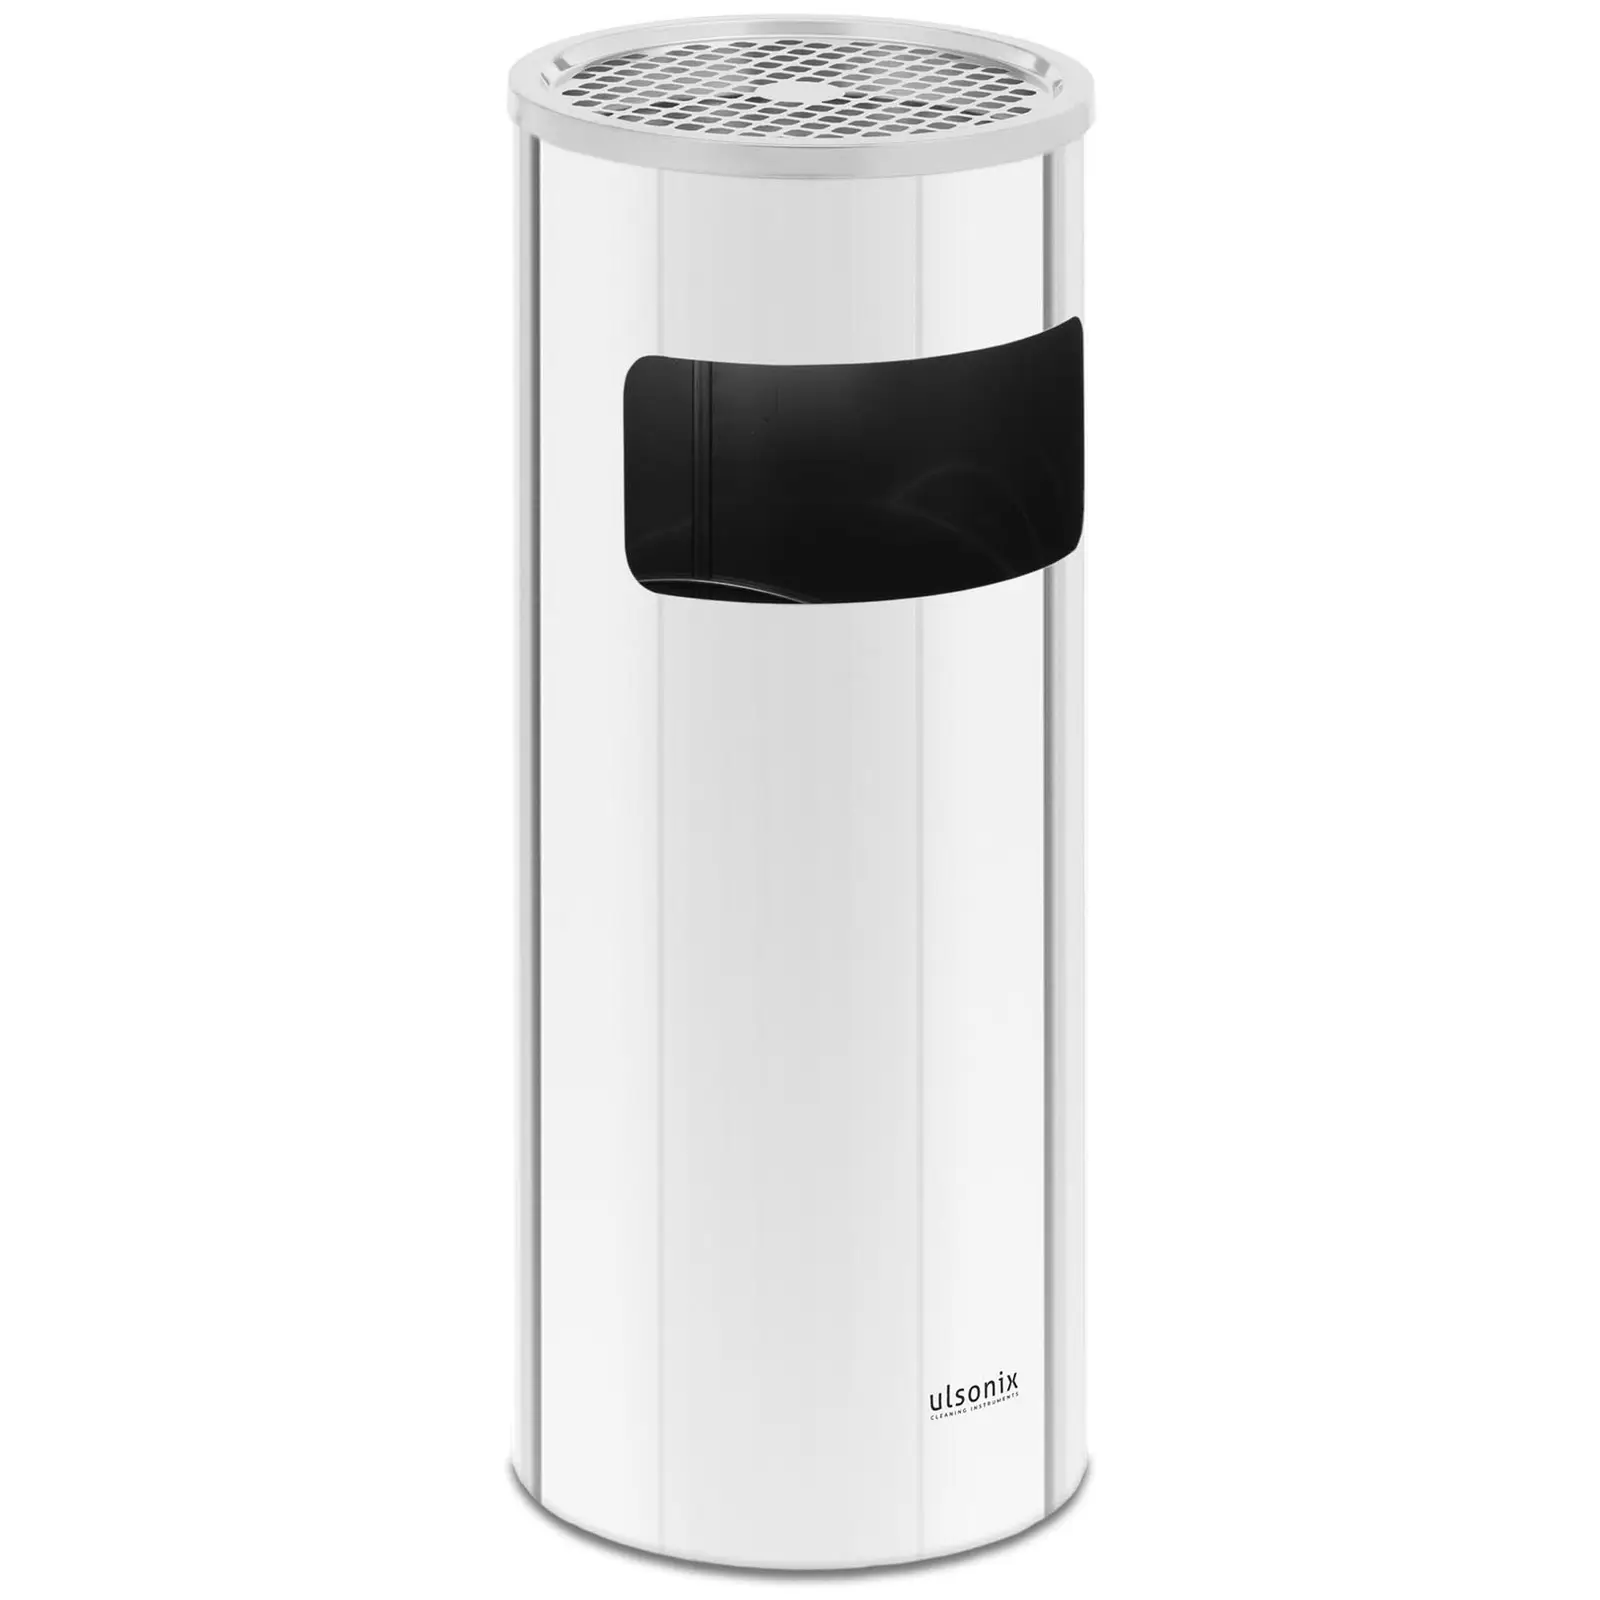 Rubbish Bin - round - with ashtray - stainless steel / galvanised steel - silver